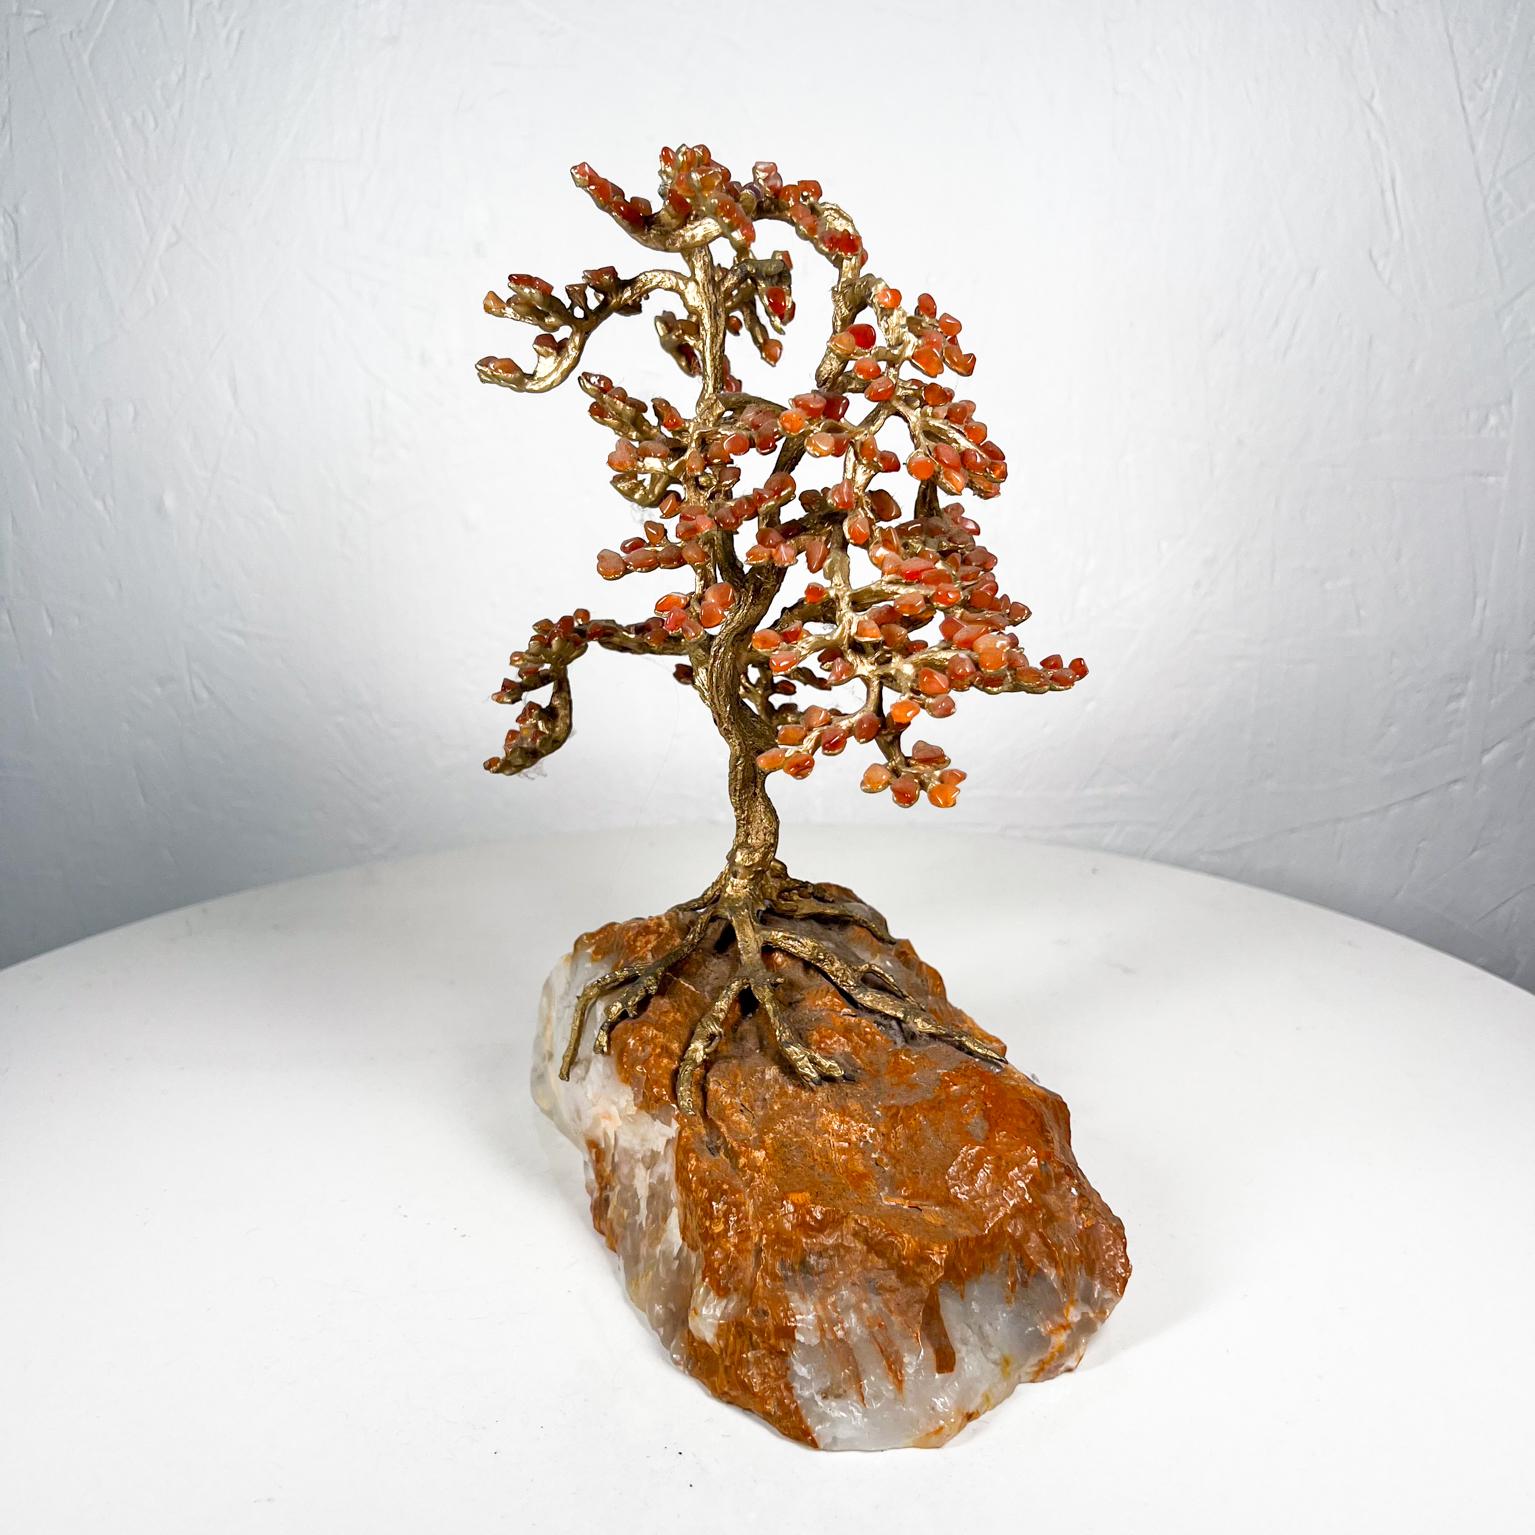 1970s Exquisite Table Sculpture Bonsai Tree on Stone 5